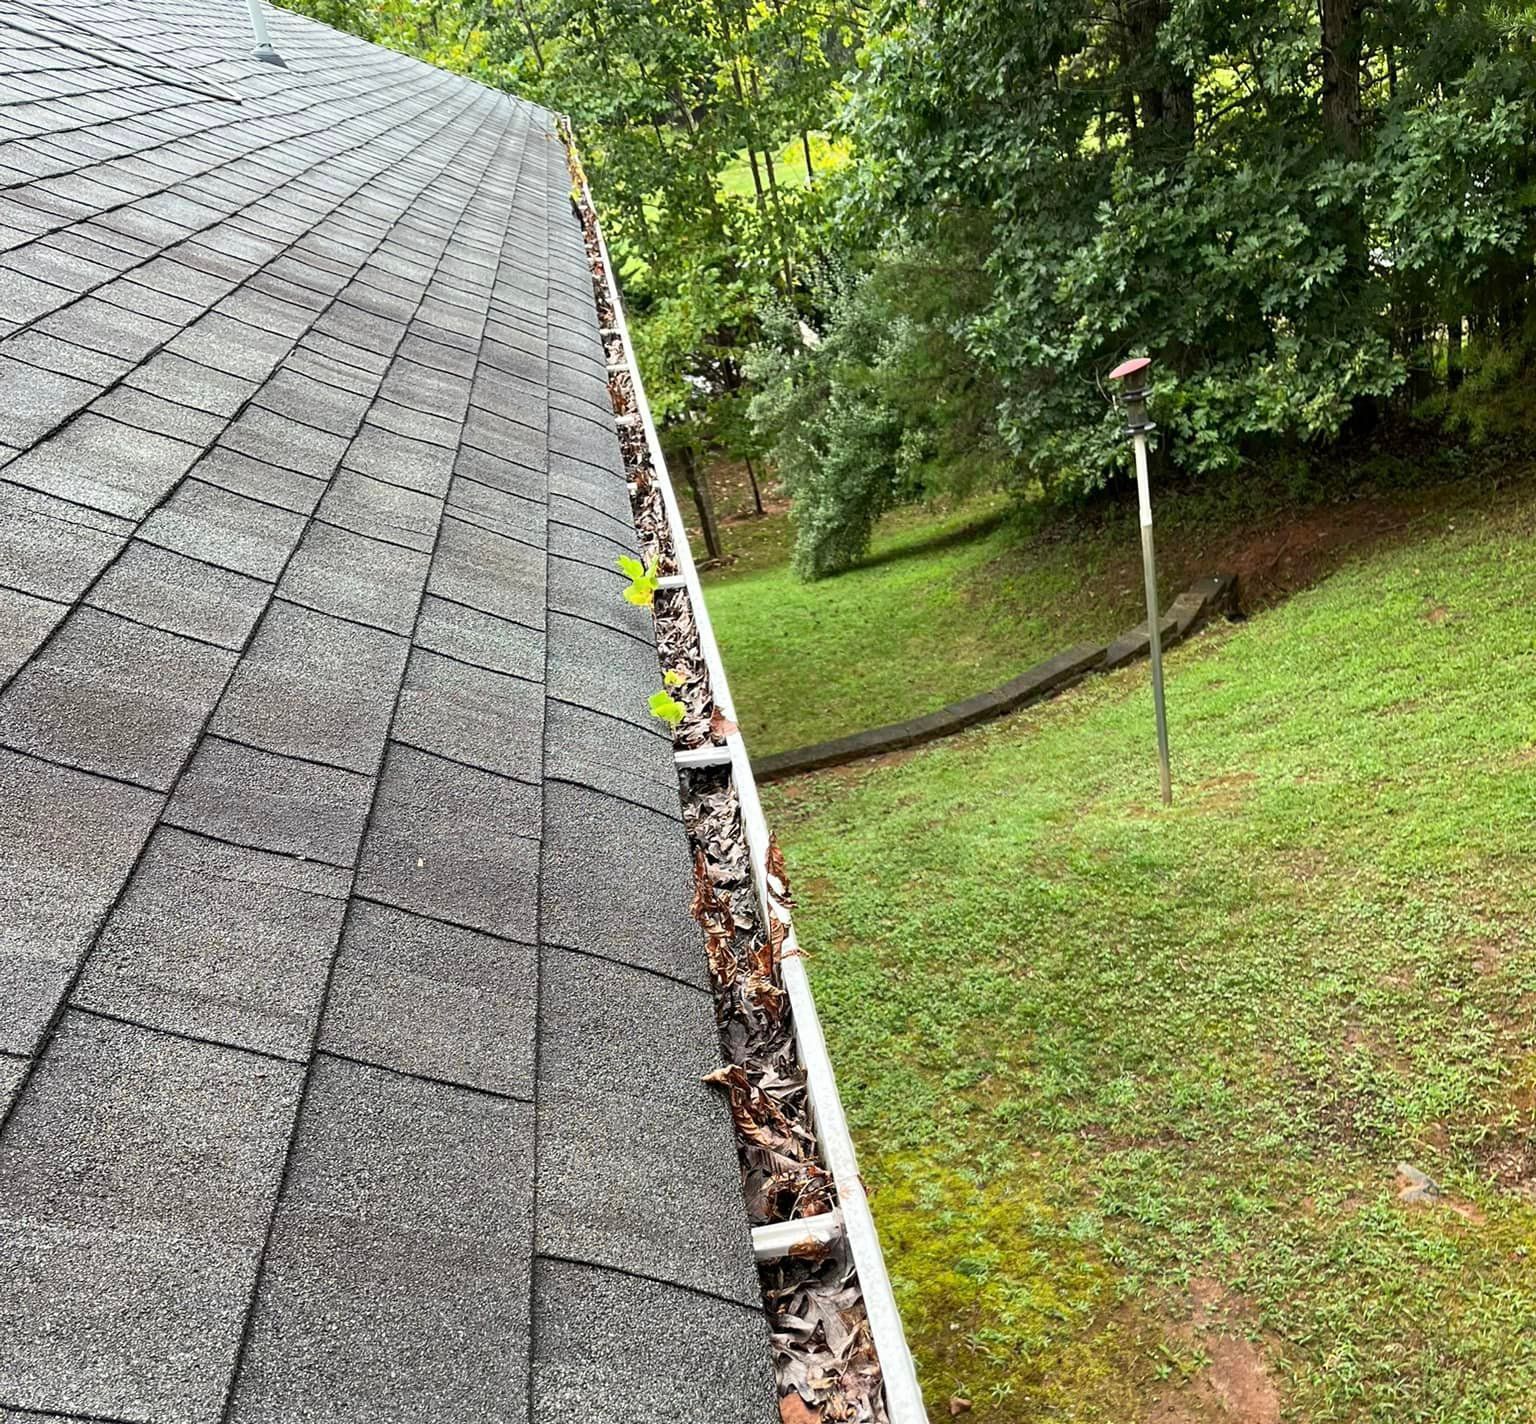 Before gutter cleaning